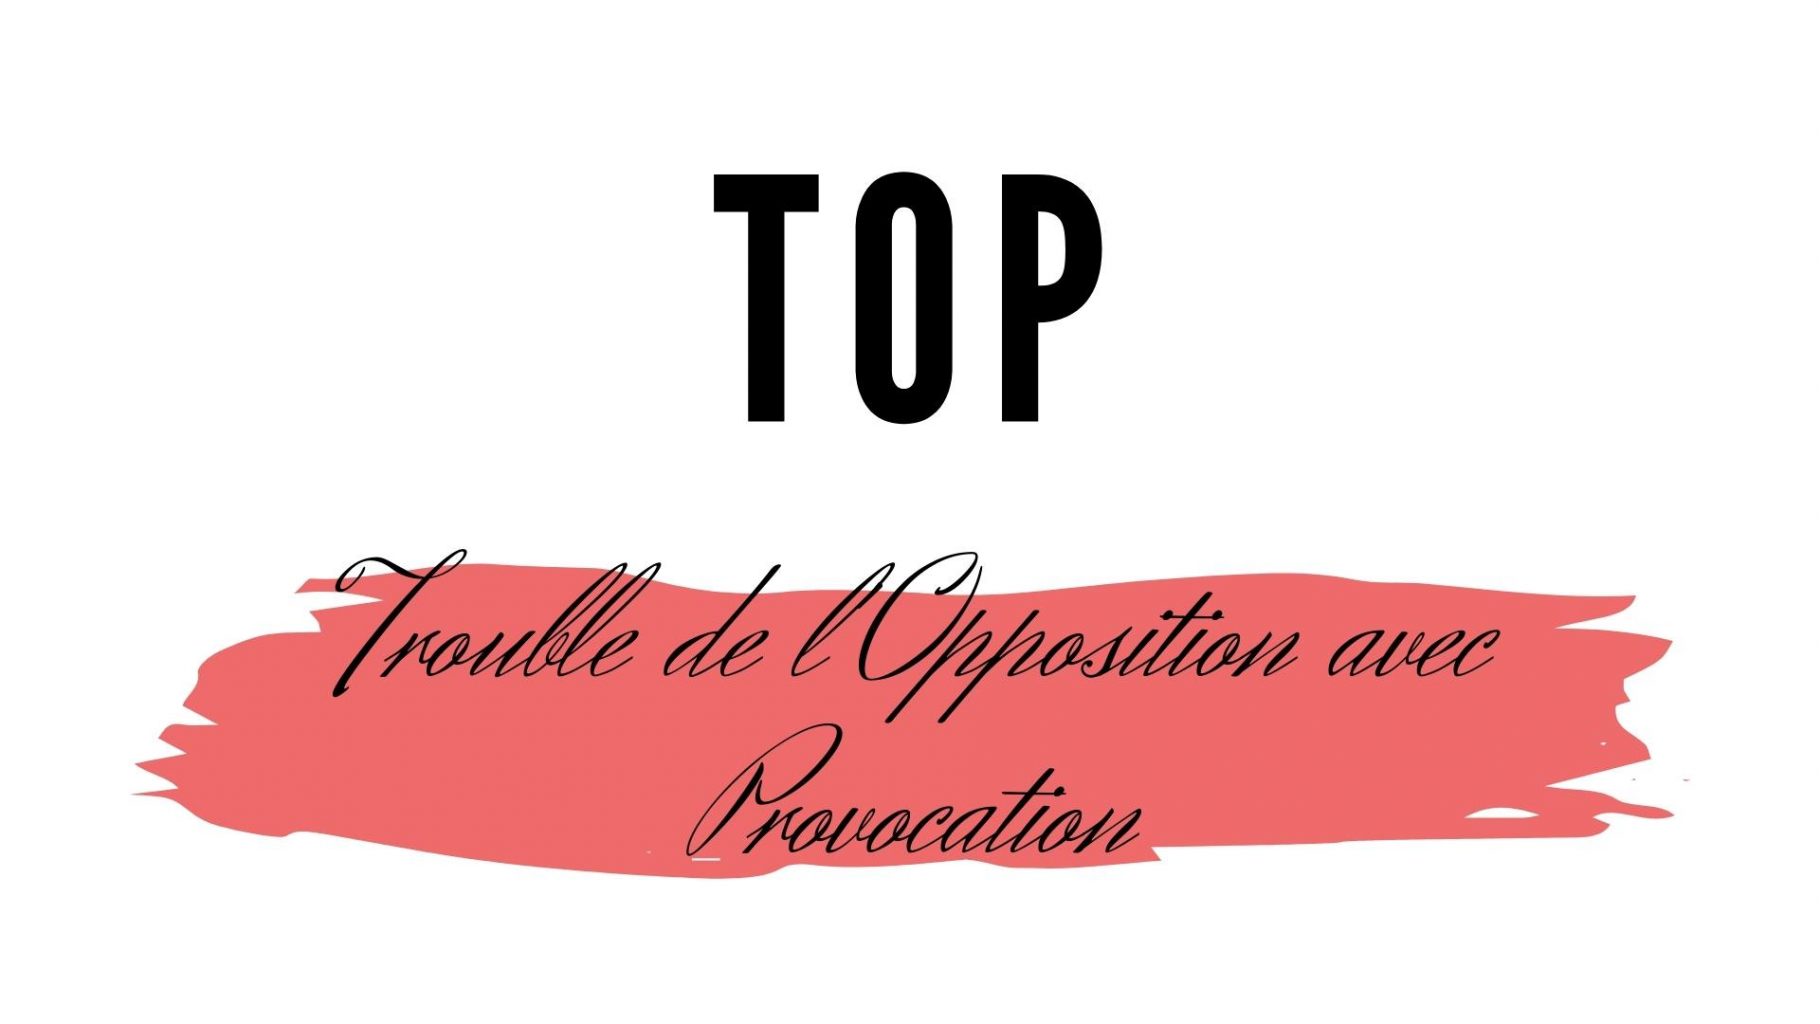 trouble-opposition-avec-provocation